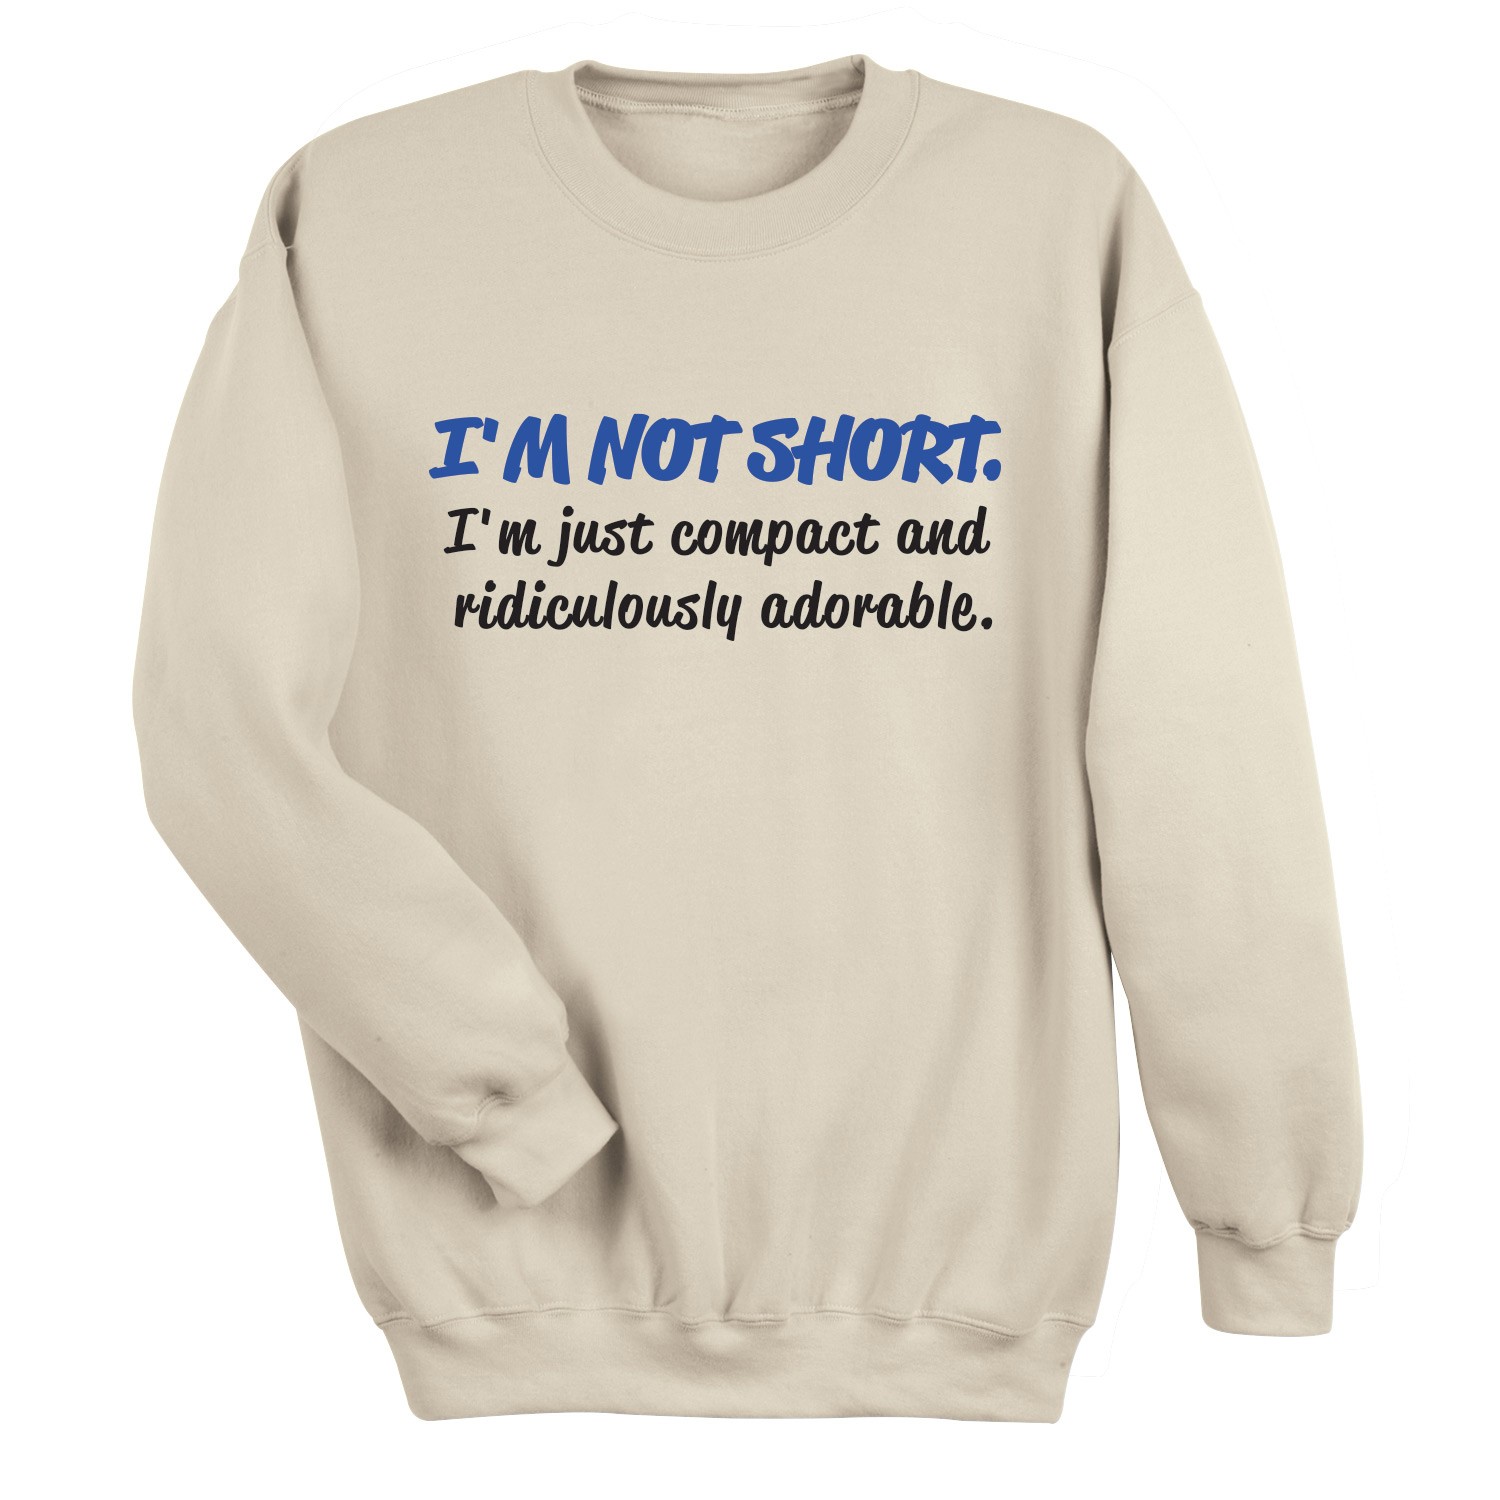 I'm Not Lollygagging. I'm Clearly Dilly Dallying. T-Shirt or Sweatshirt